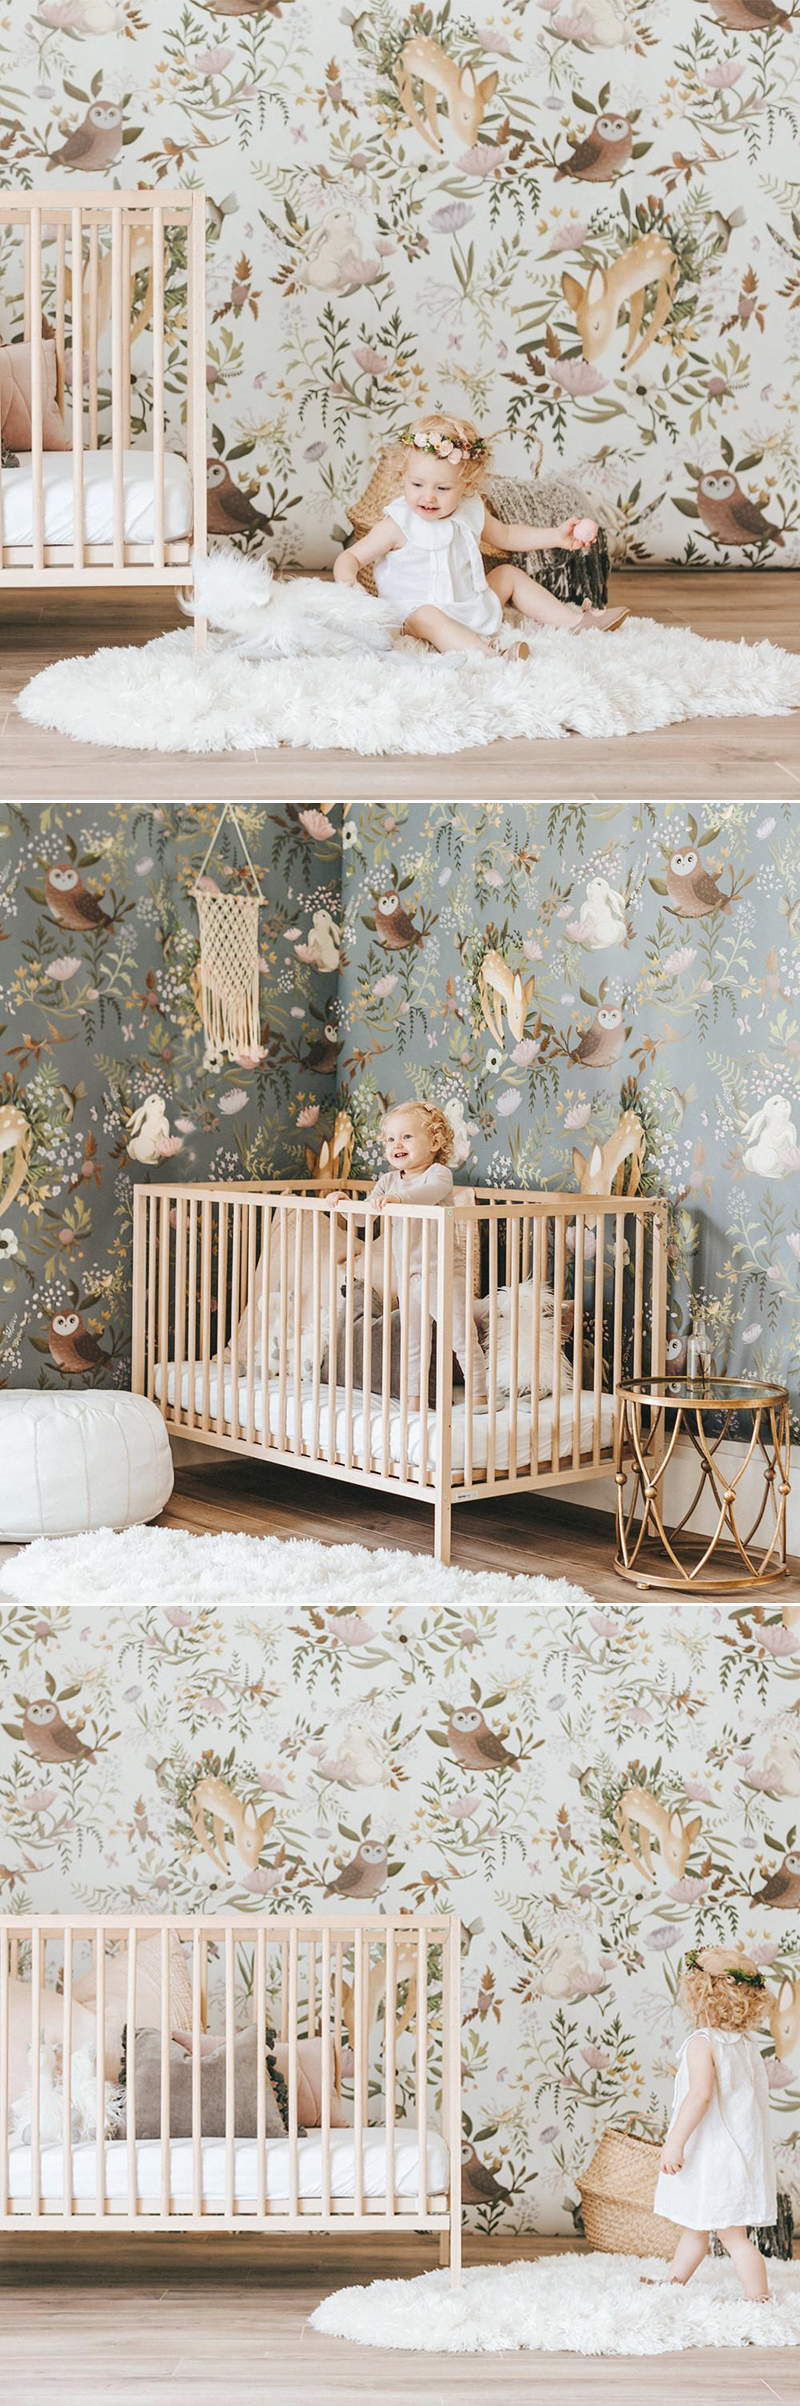 Ideas For A Babys Room  Easy Decor Solutions  Walls By Me